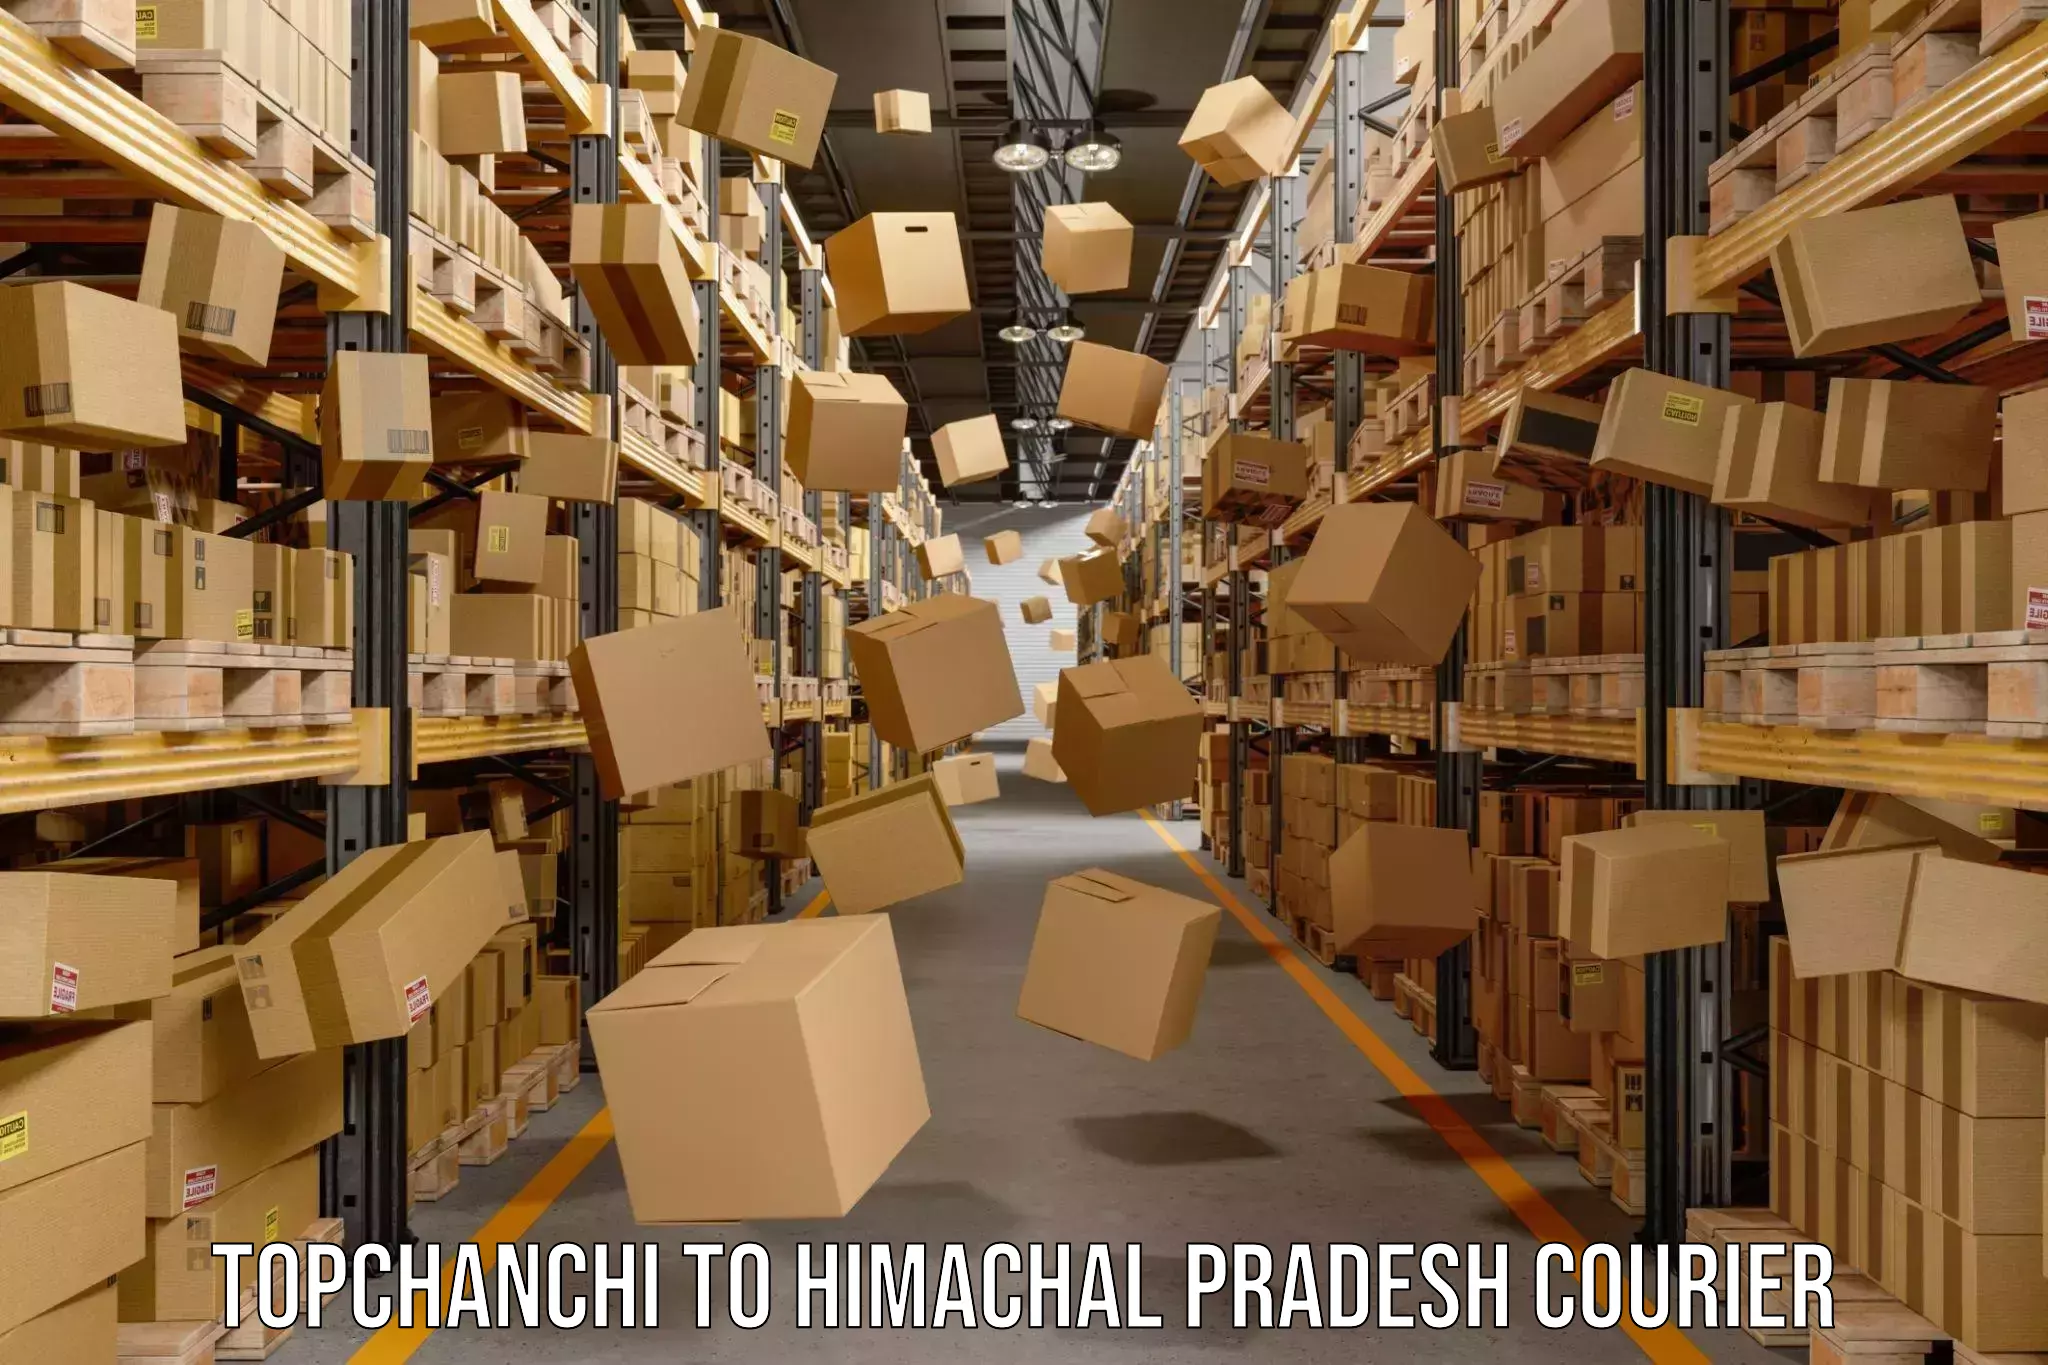 Multi-national courier services Topchanchi to Himachal Pradesh